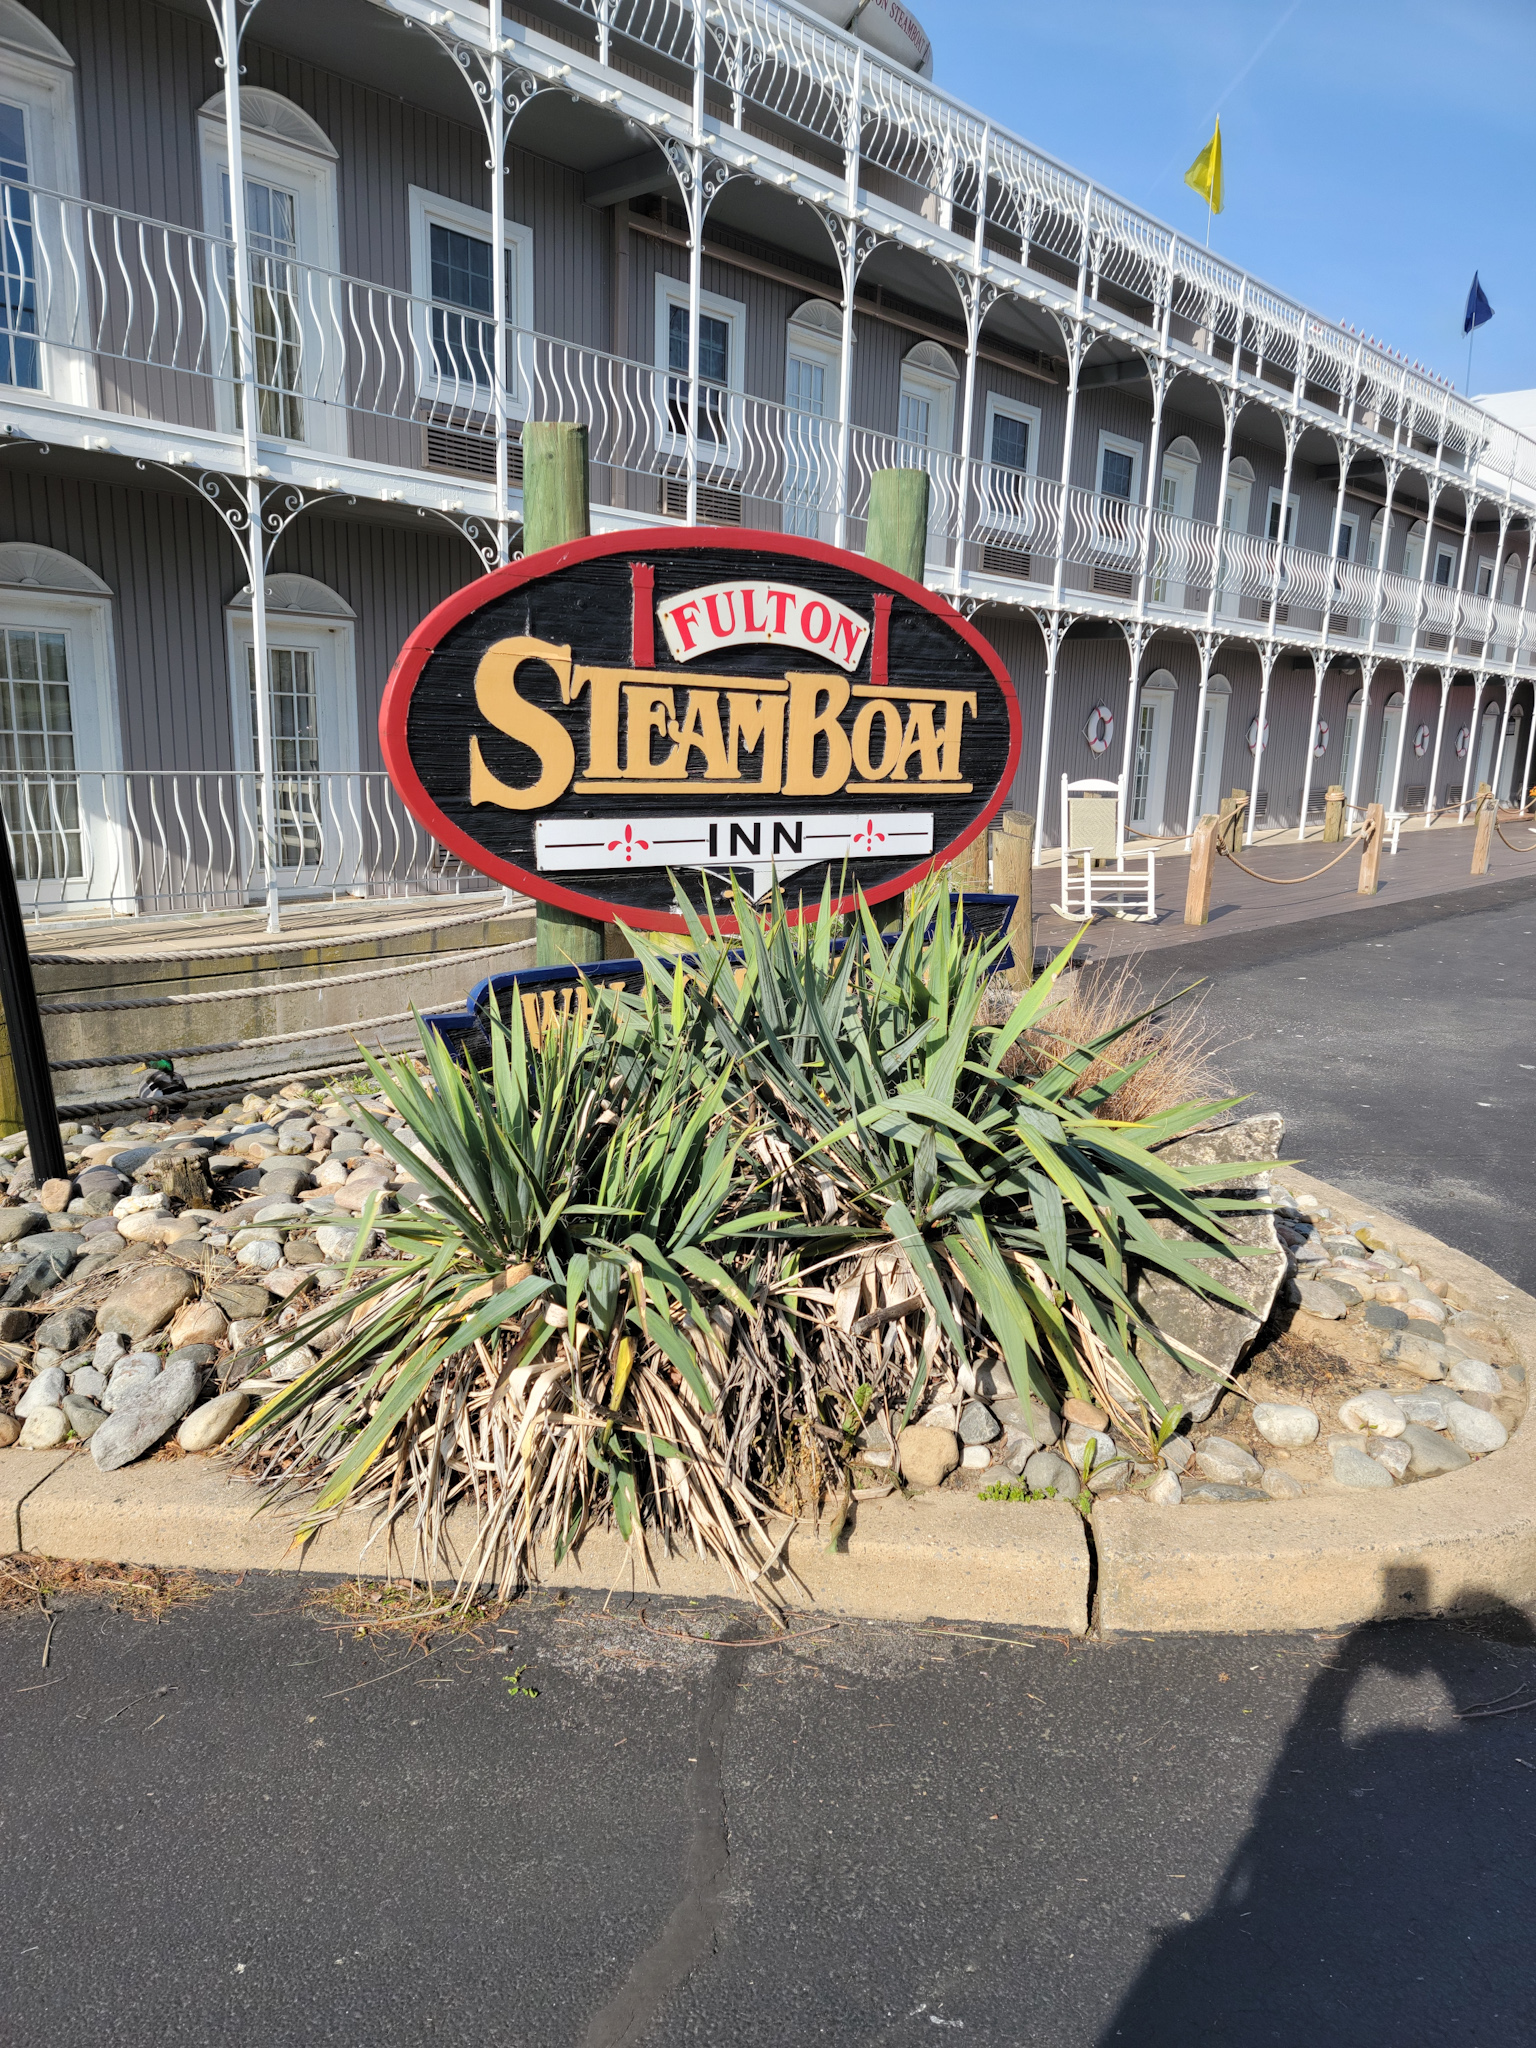 Our Stay at the Fulton Steamboat Inn - Lancaster, PA - THE MOMMY SPICE